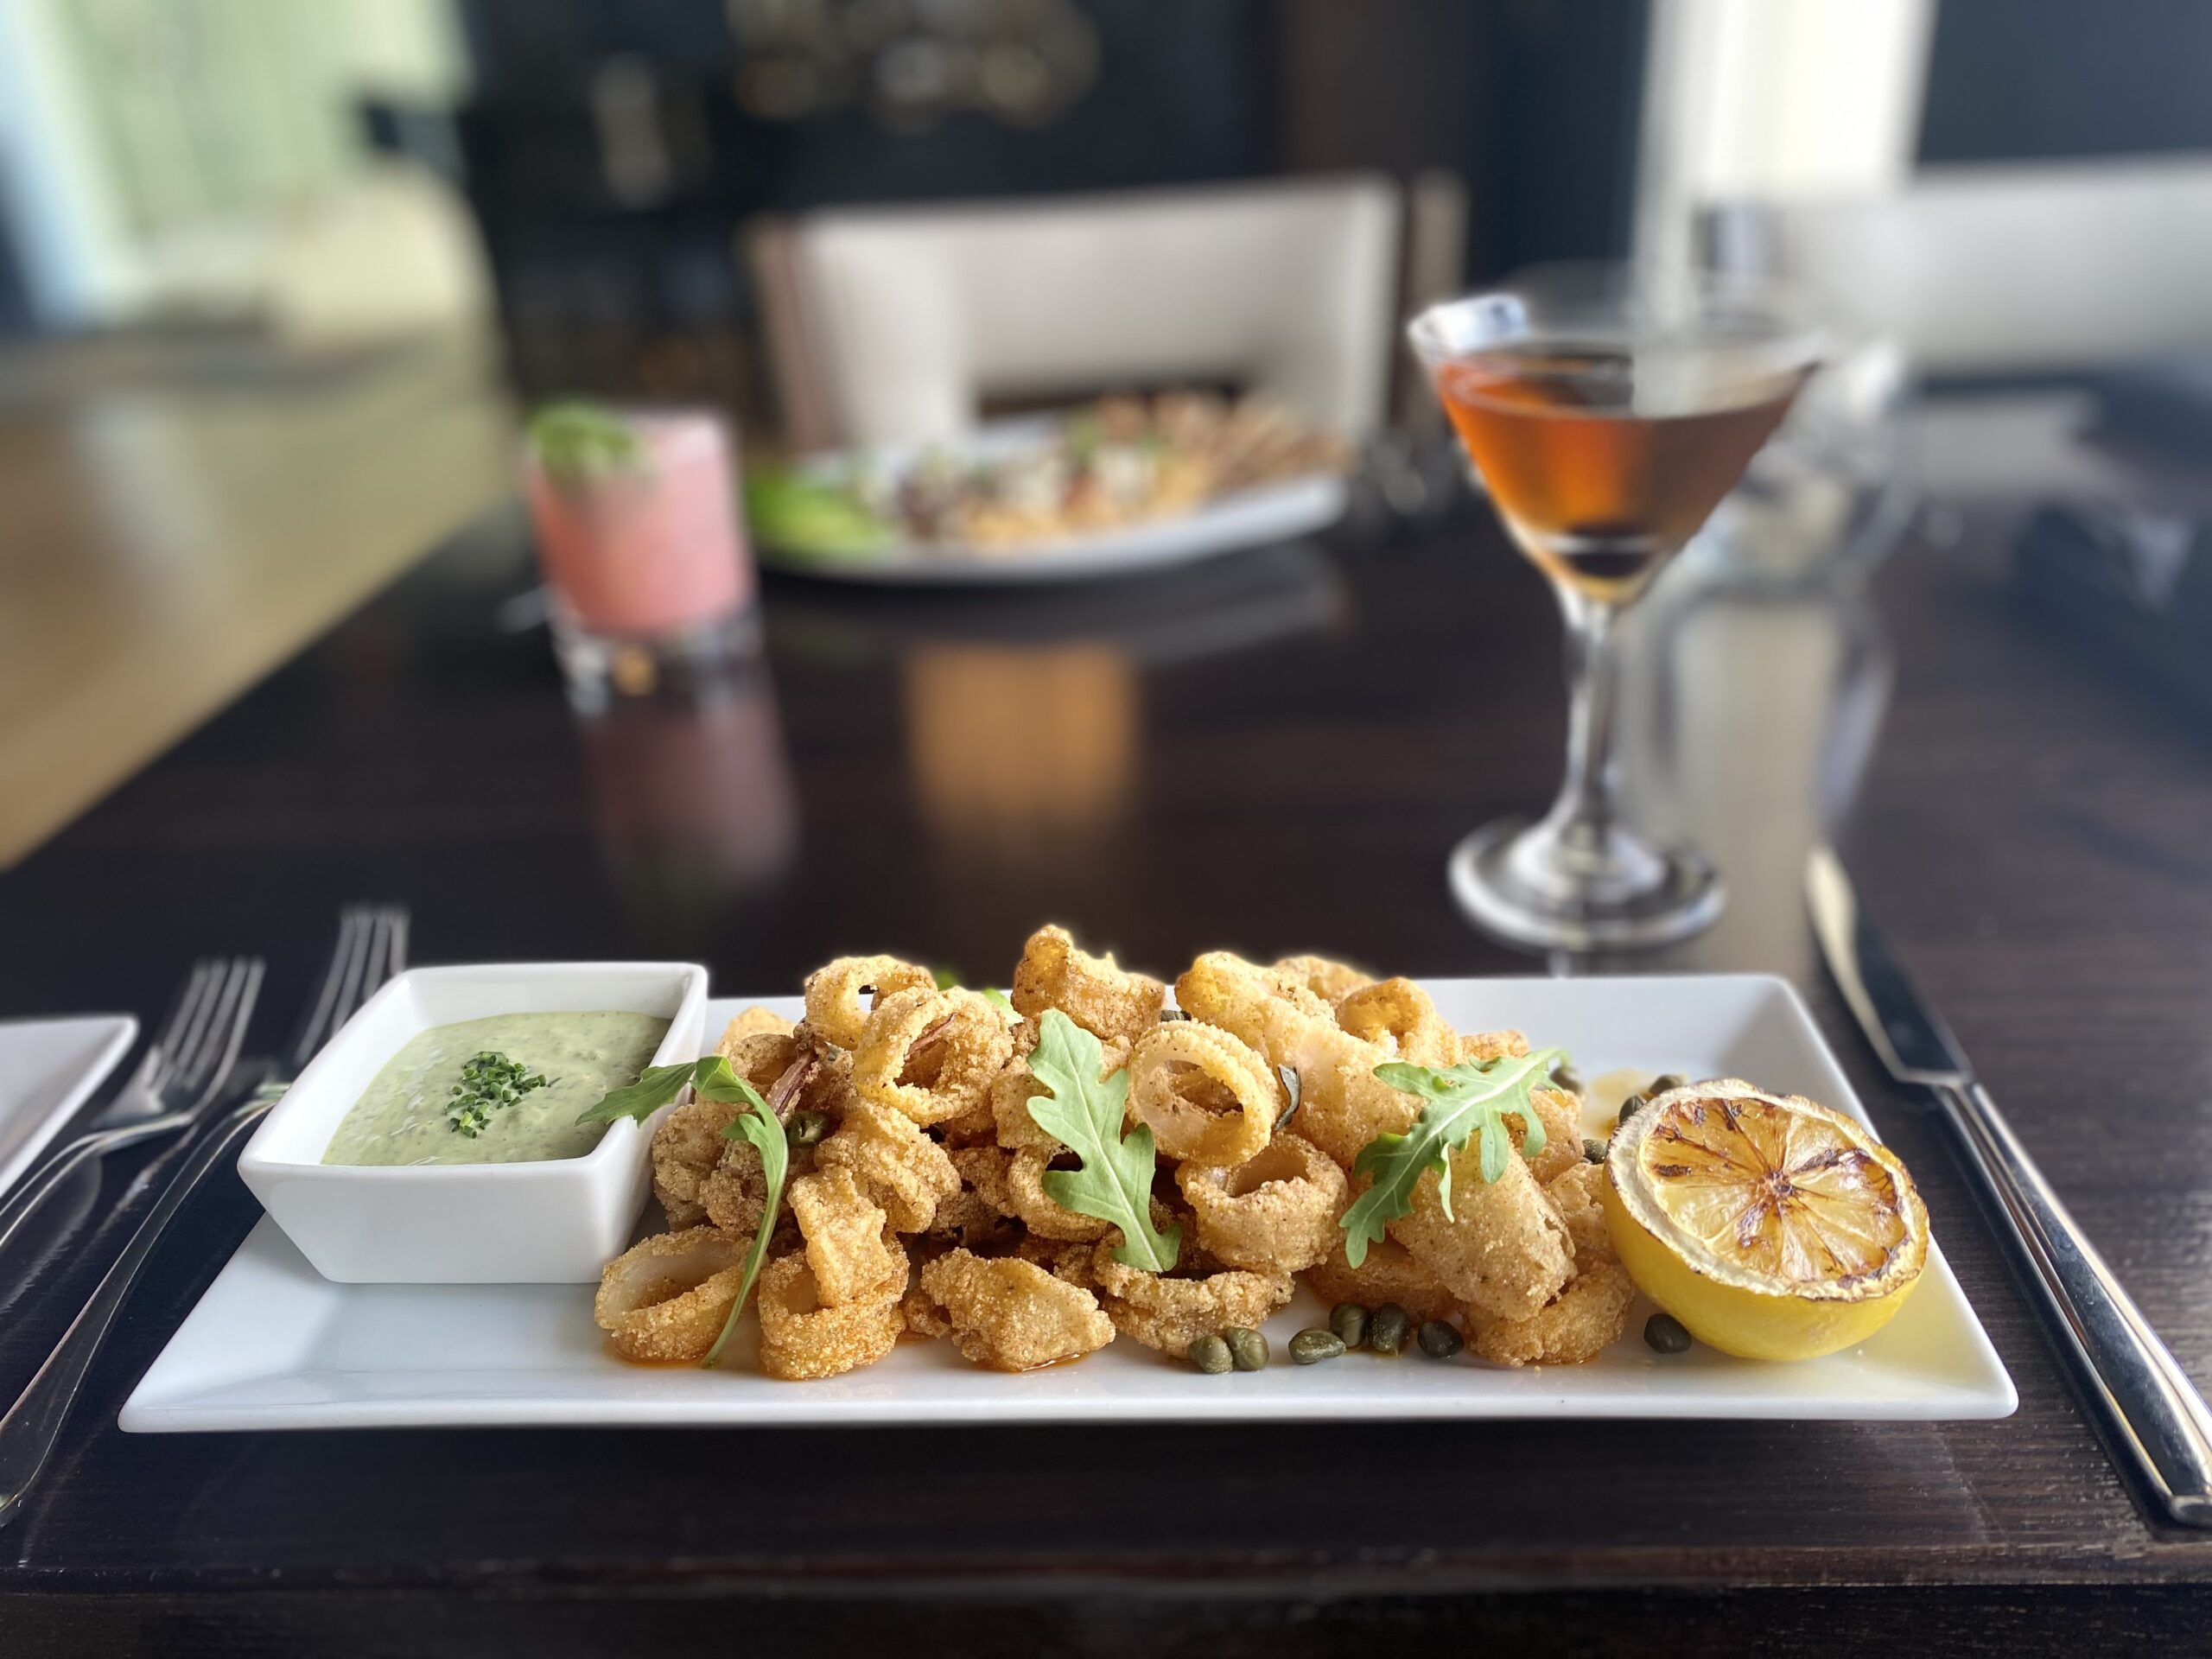 Calamari on rectangular dish in foreground with cocktail in background
The best chef in Cape May finds the best home at the Ocean Club Hotel and SeaSalt Restaurant in Cape May NJ